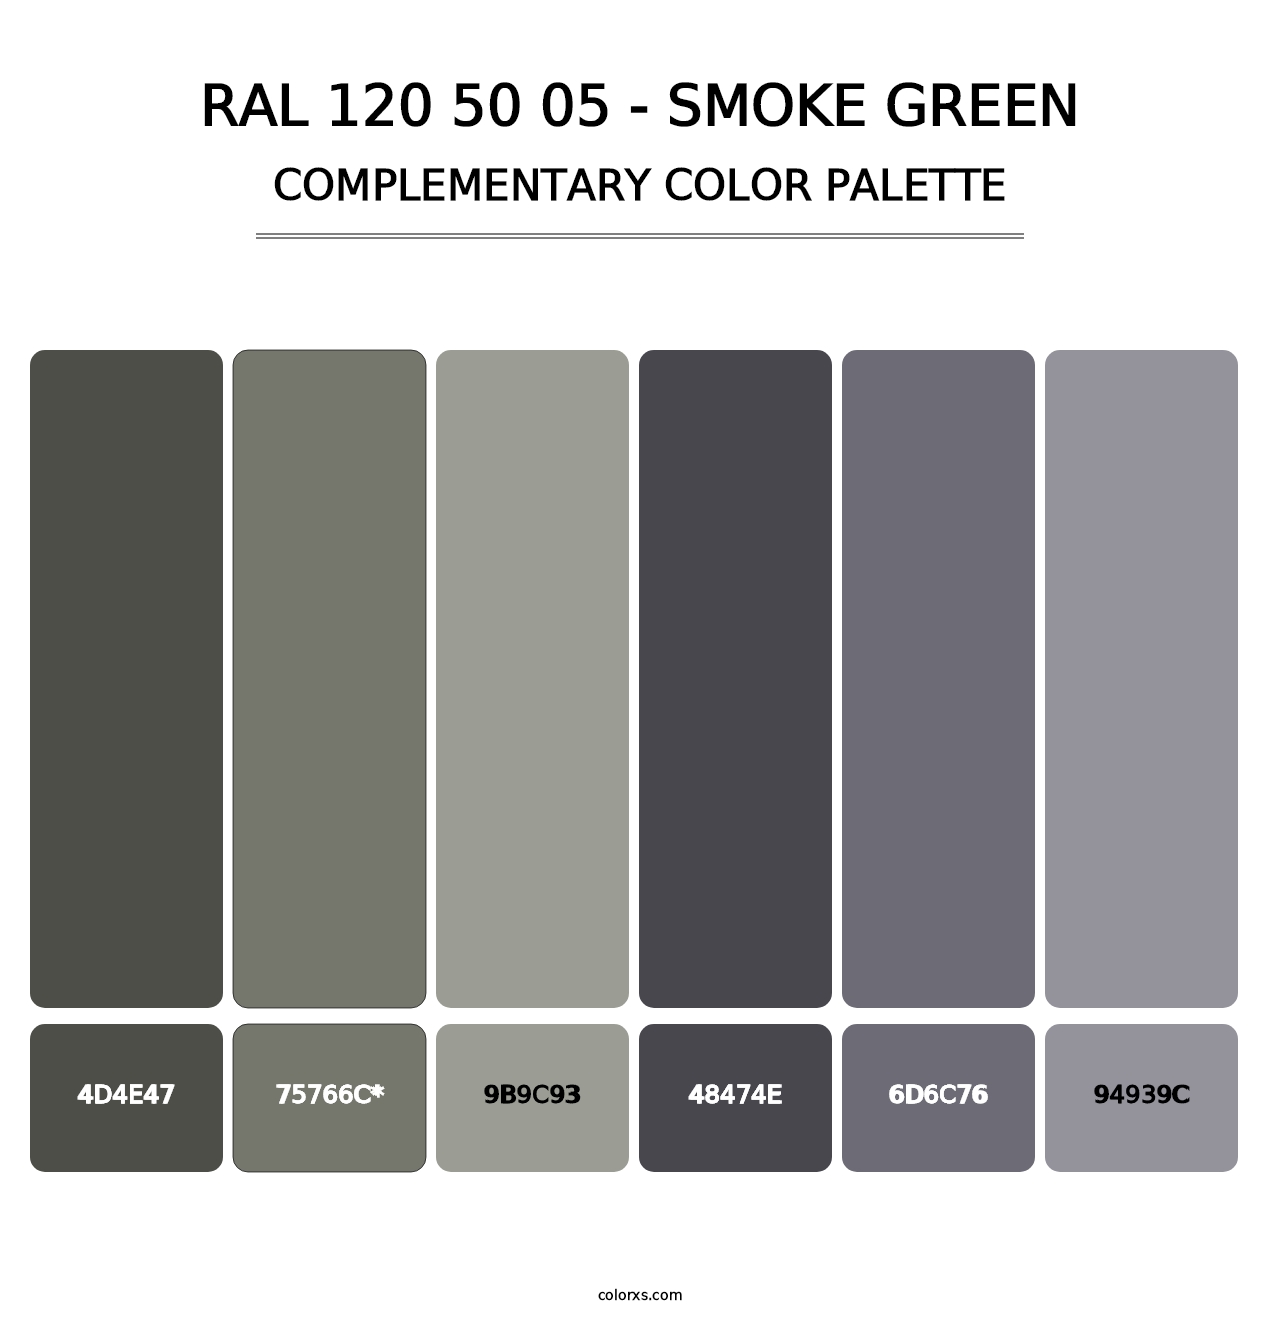 RAL 120 50 05 - Smoke Green - Complementary Color Palette